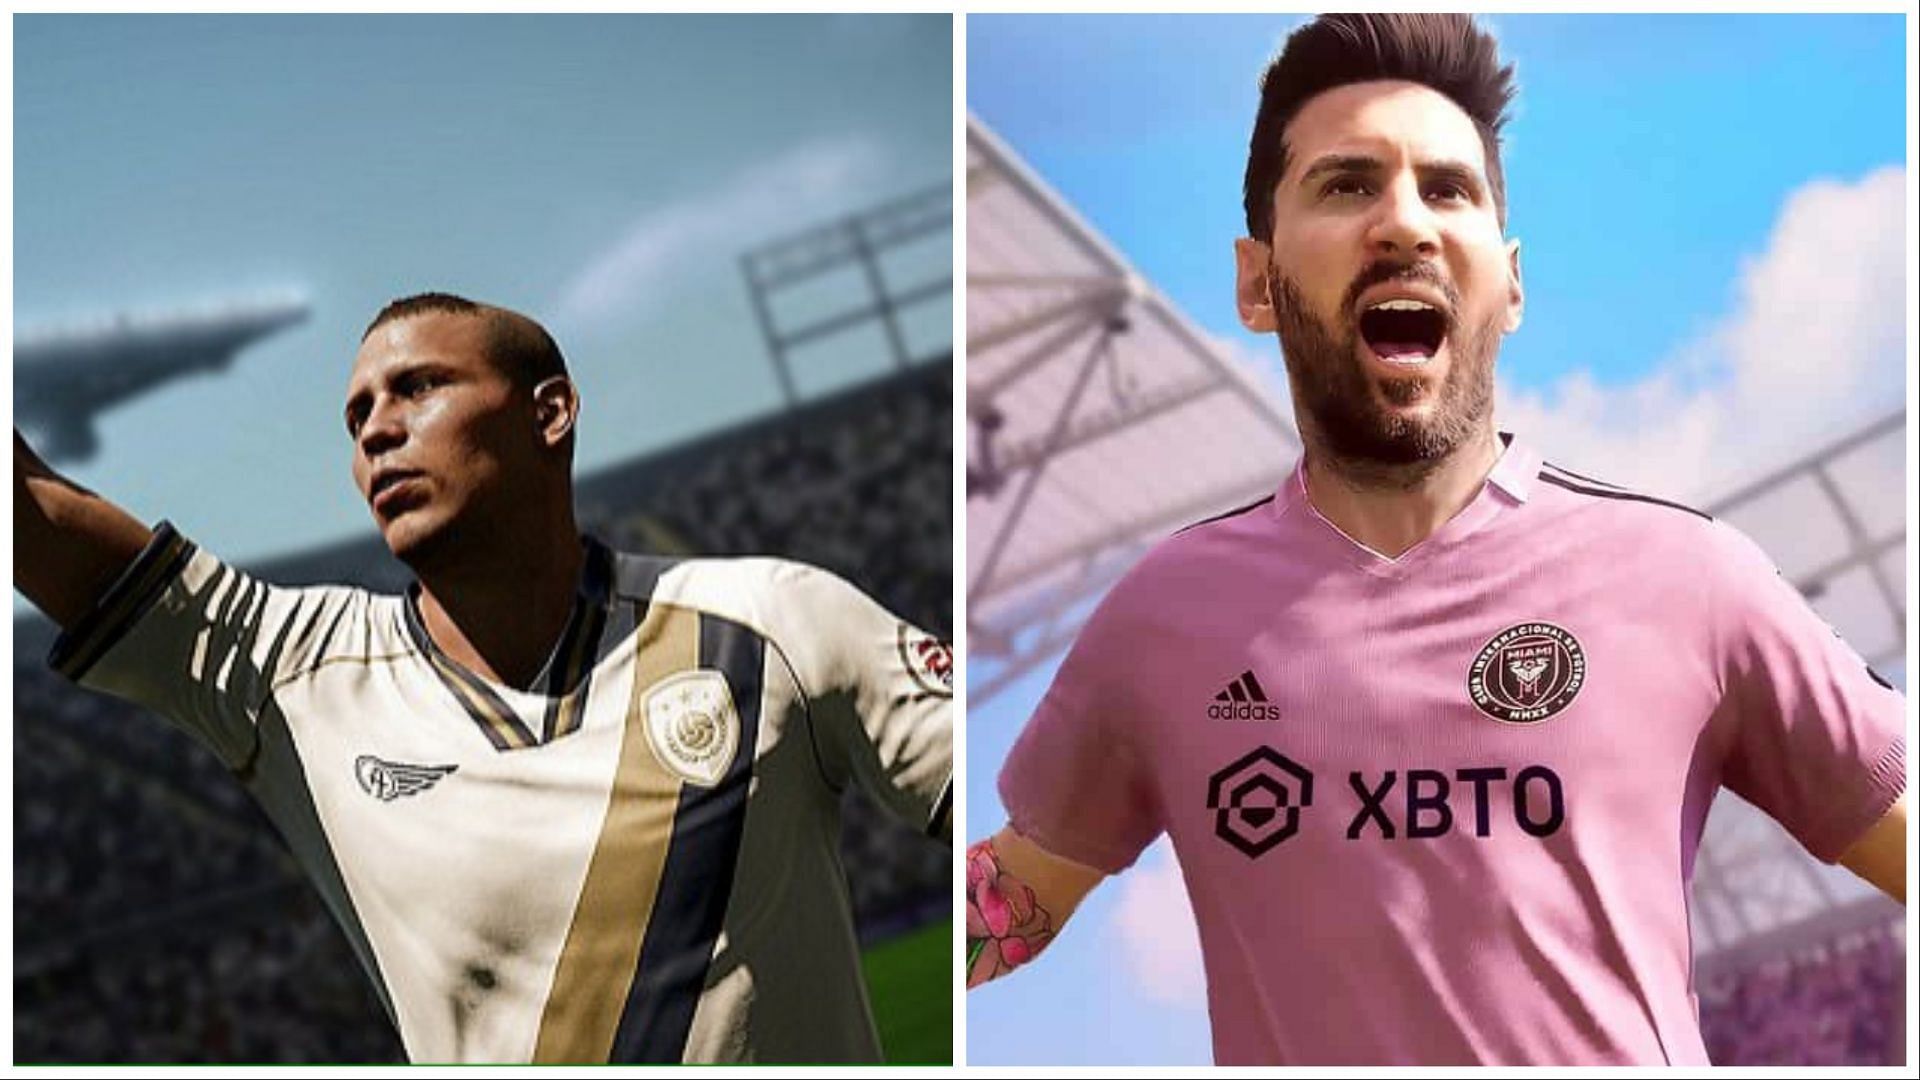 Ultimate Team revolves around getting the best players (Images via EA Sports)